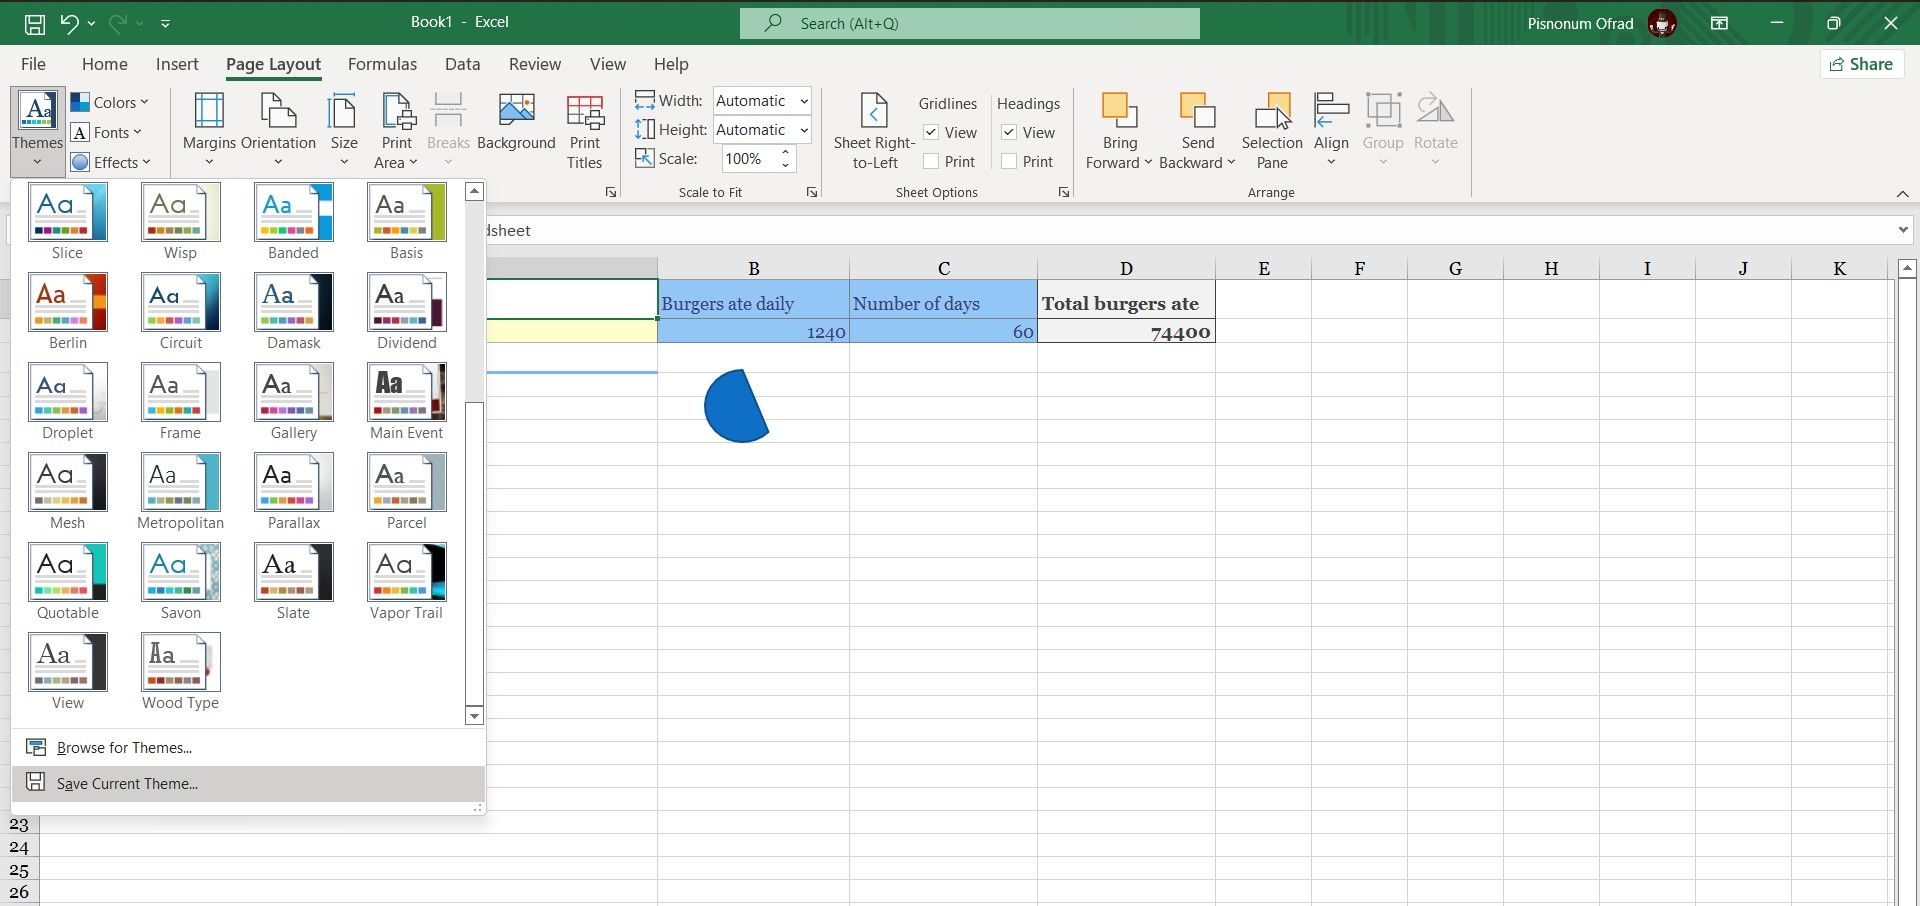 A custom theme in Excel